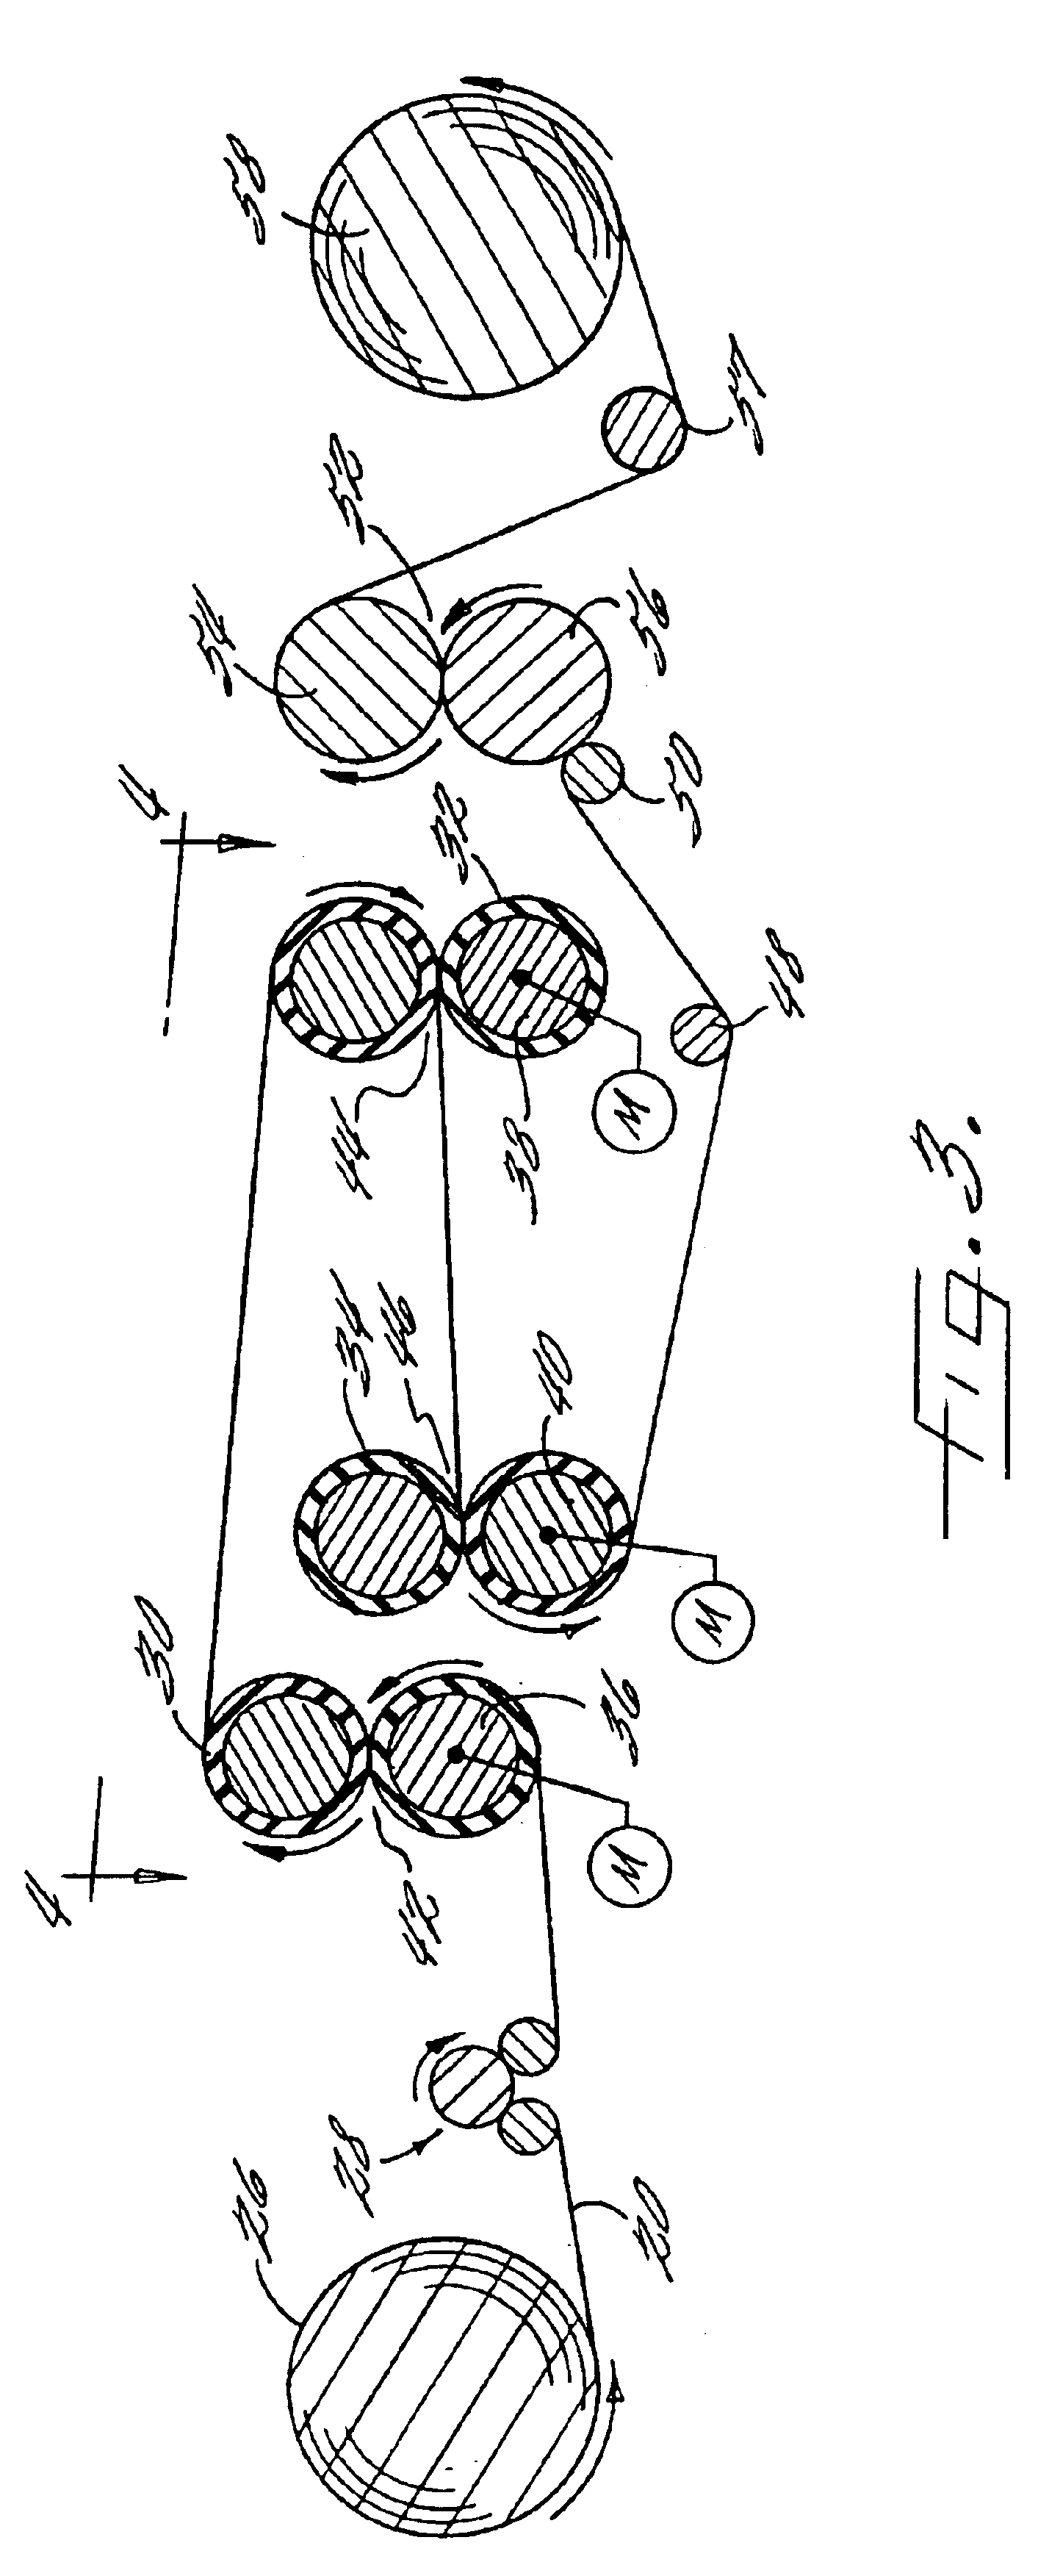 Undirectionally cold stretched nonwoven webs of multipolymer fibers for stretch fabrics and disposable absorbent articles containing them